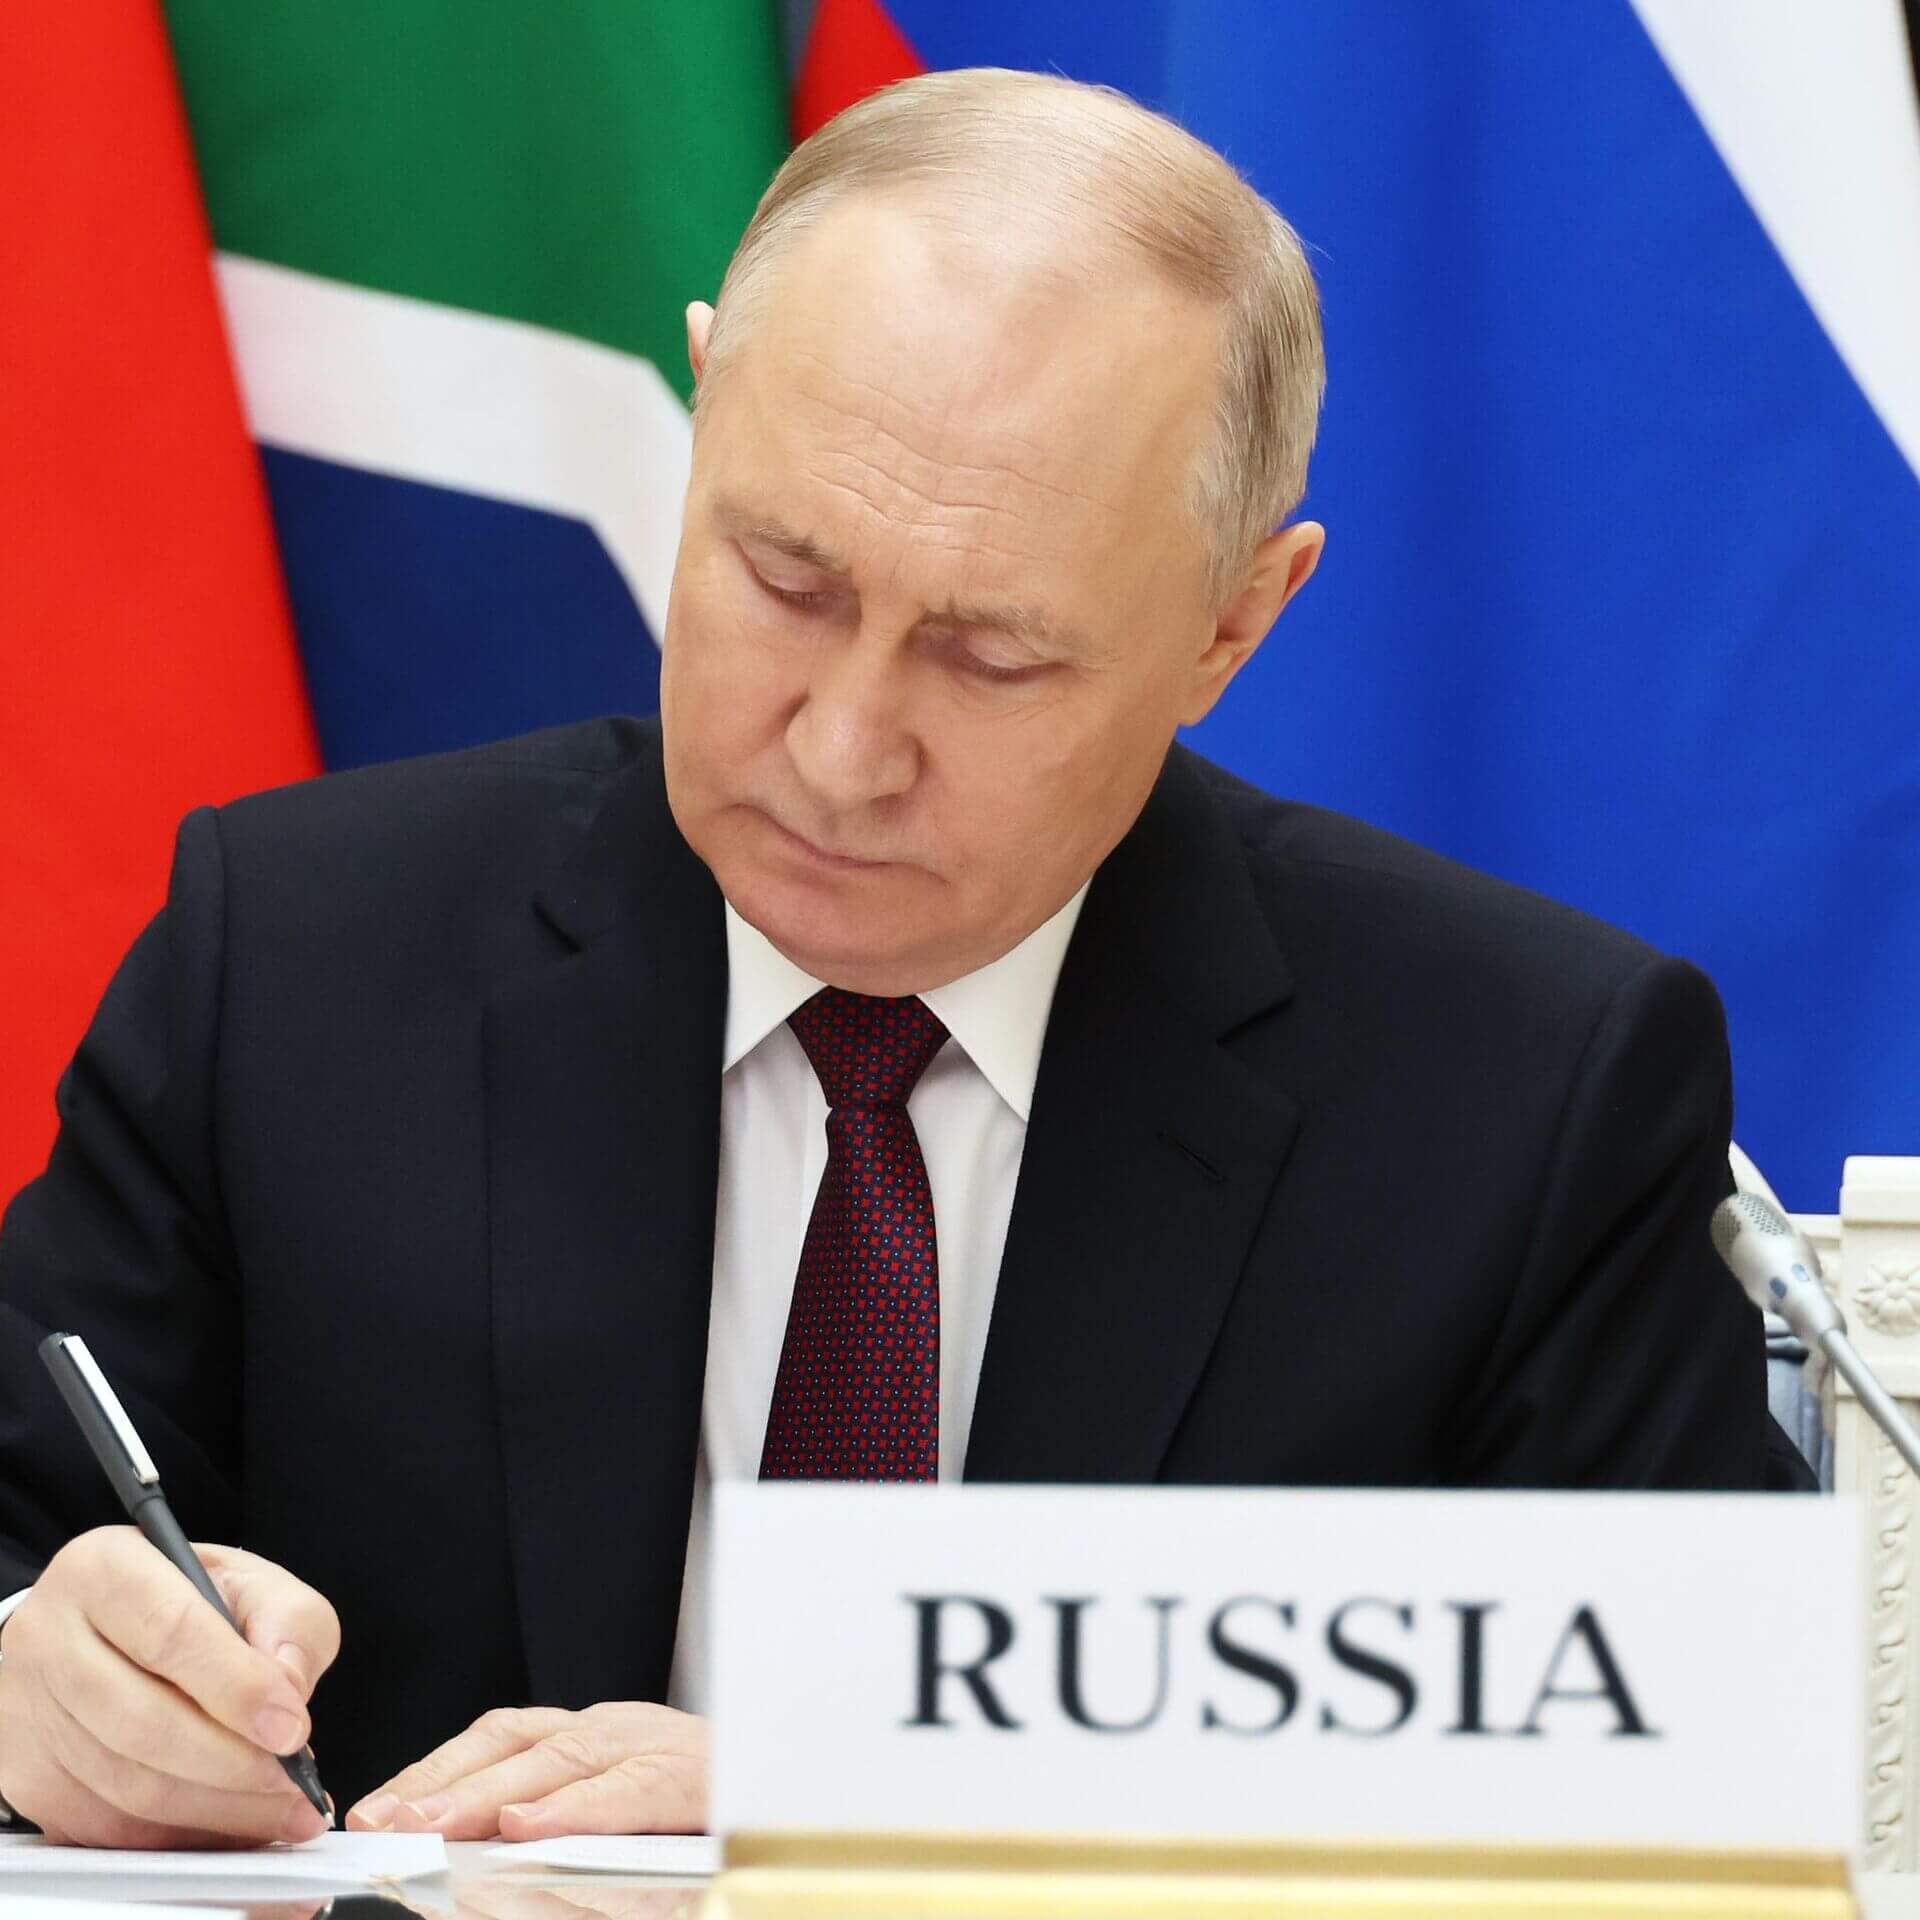 BRICS Attracting “Like-Minded” Countries Sharing Bloc’s Underlying Principles: Russia’s Putin